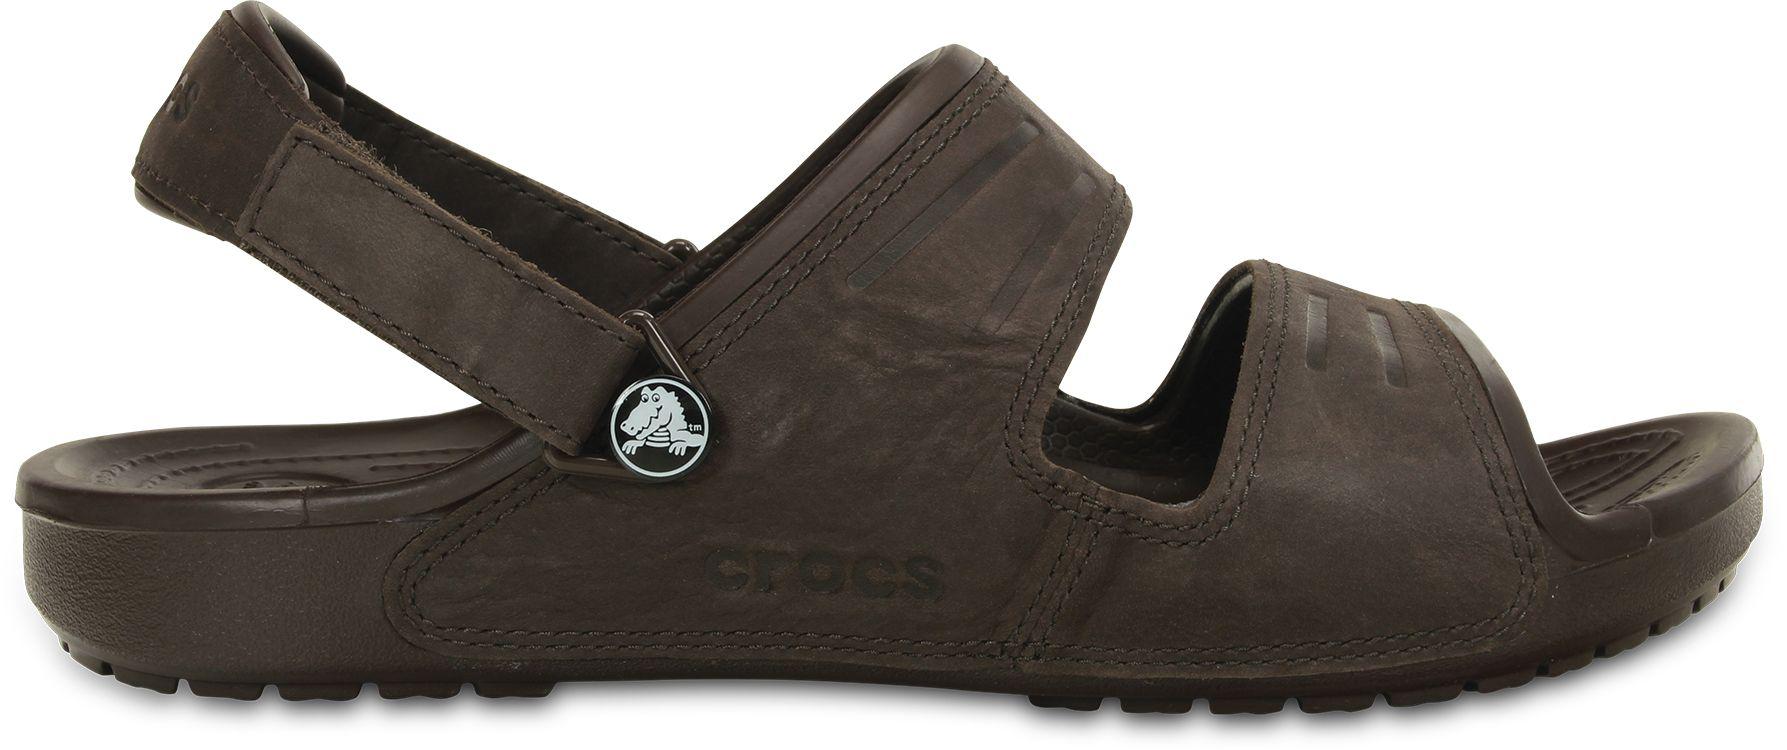 Crocs™ Leather Yukon 2-strap Clogs in Brown for Men - Lyst